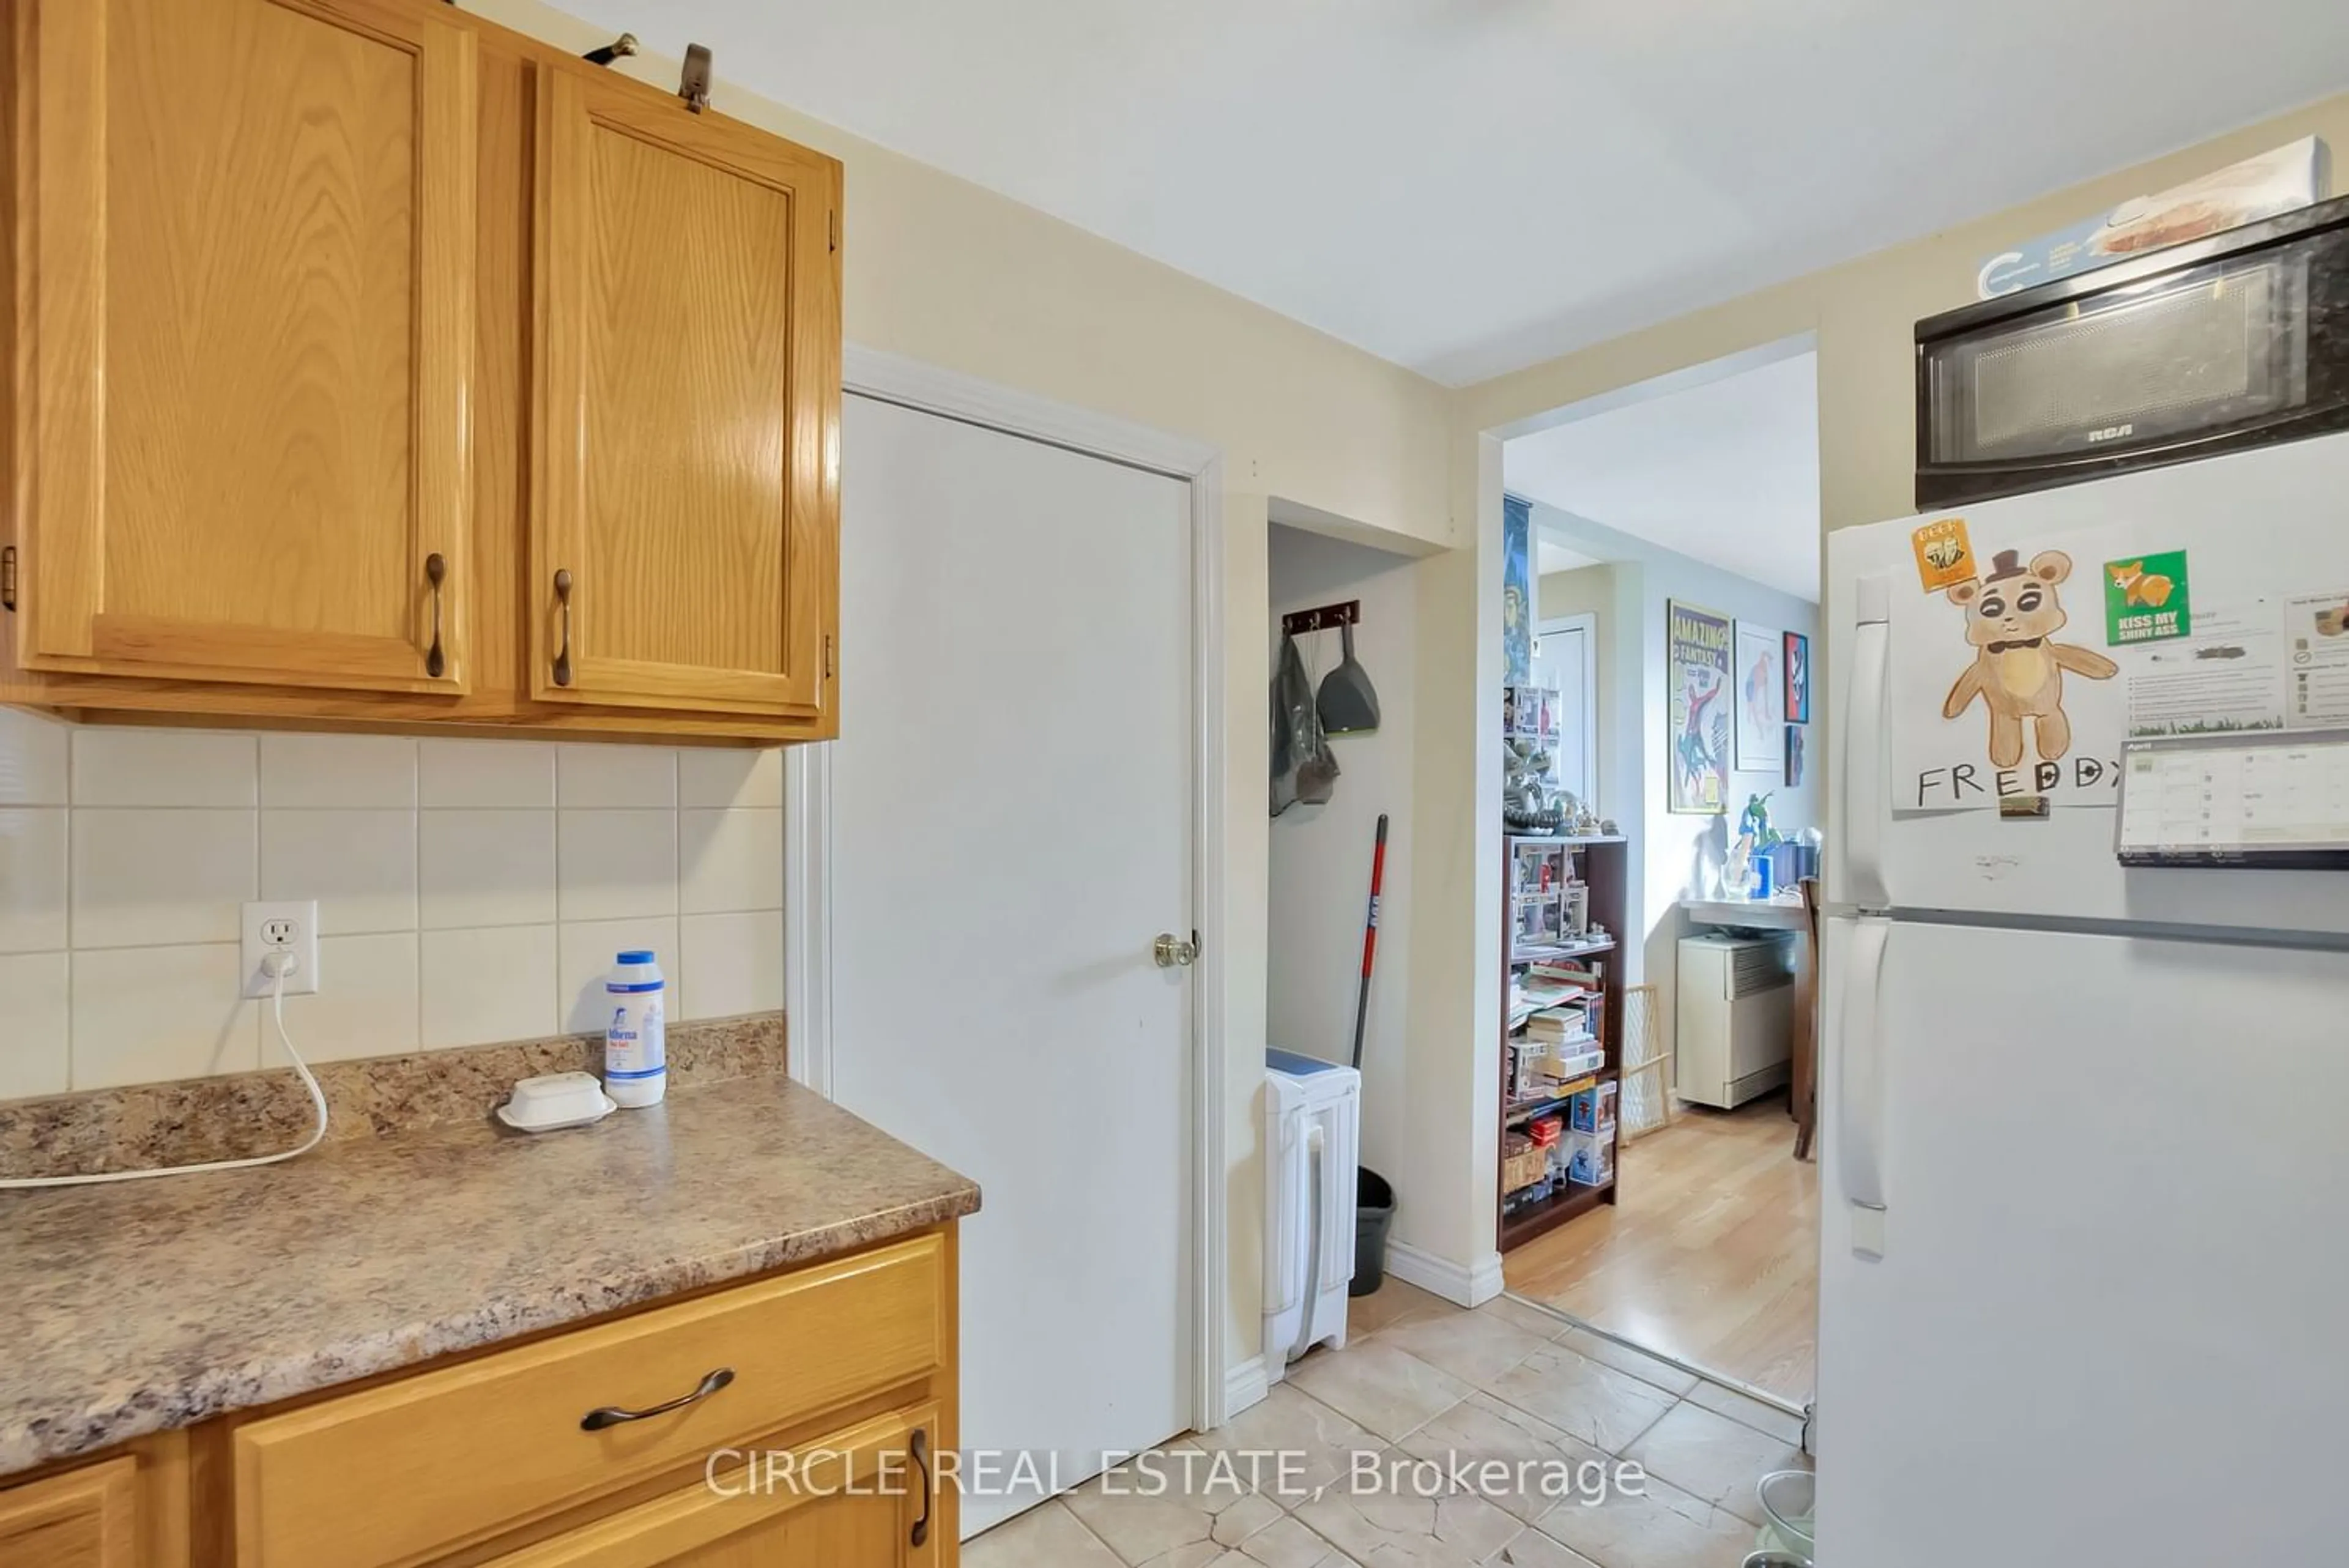 Standard kitchen for 1162 Richmond St #1160, Windsor Ontario N9A 4A4